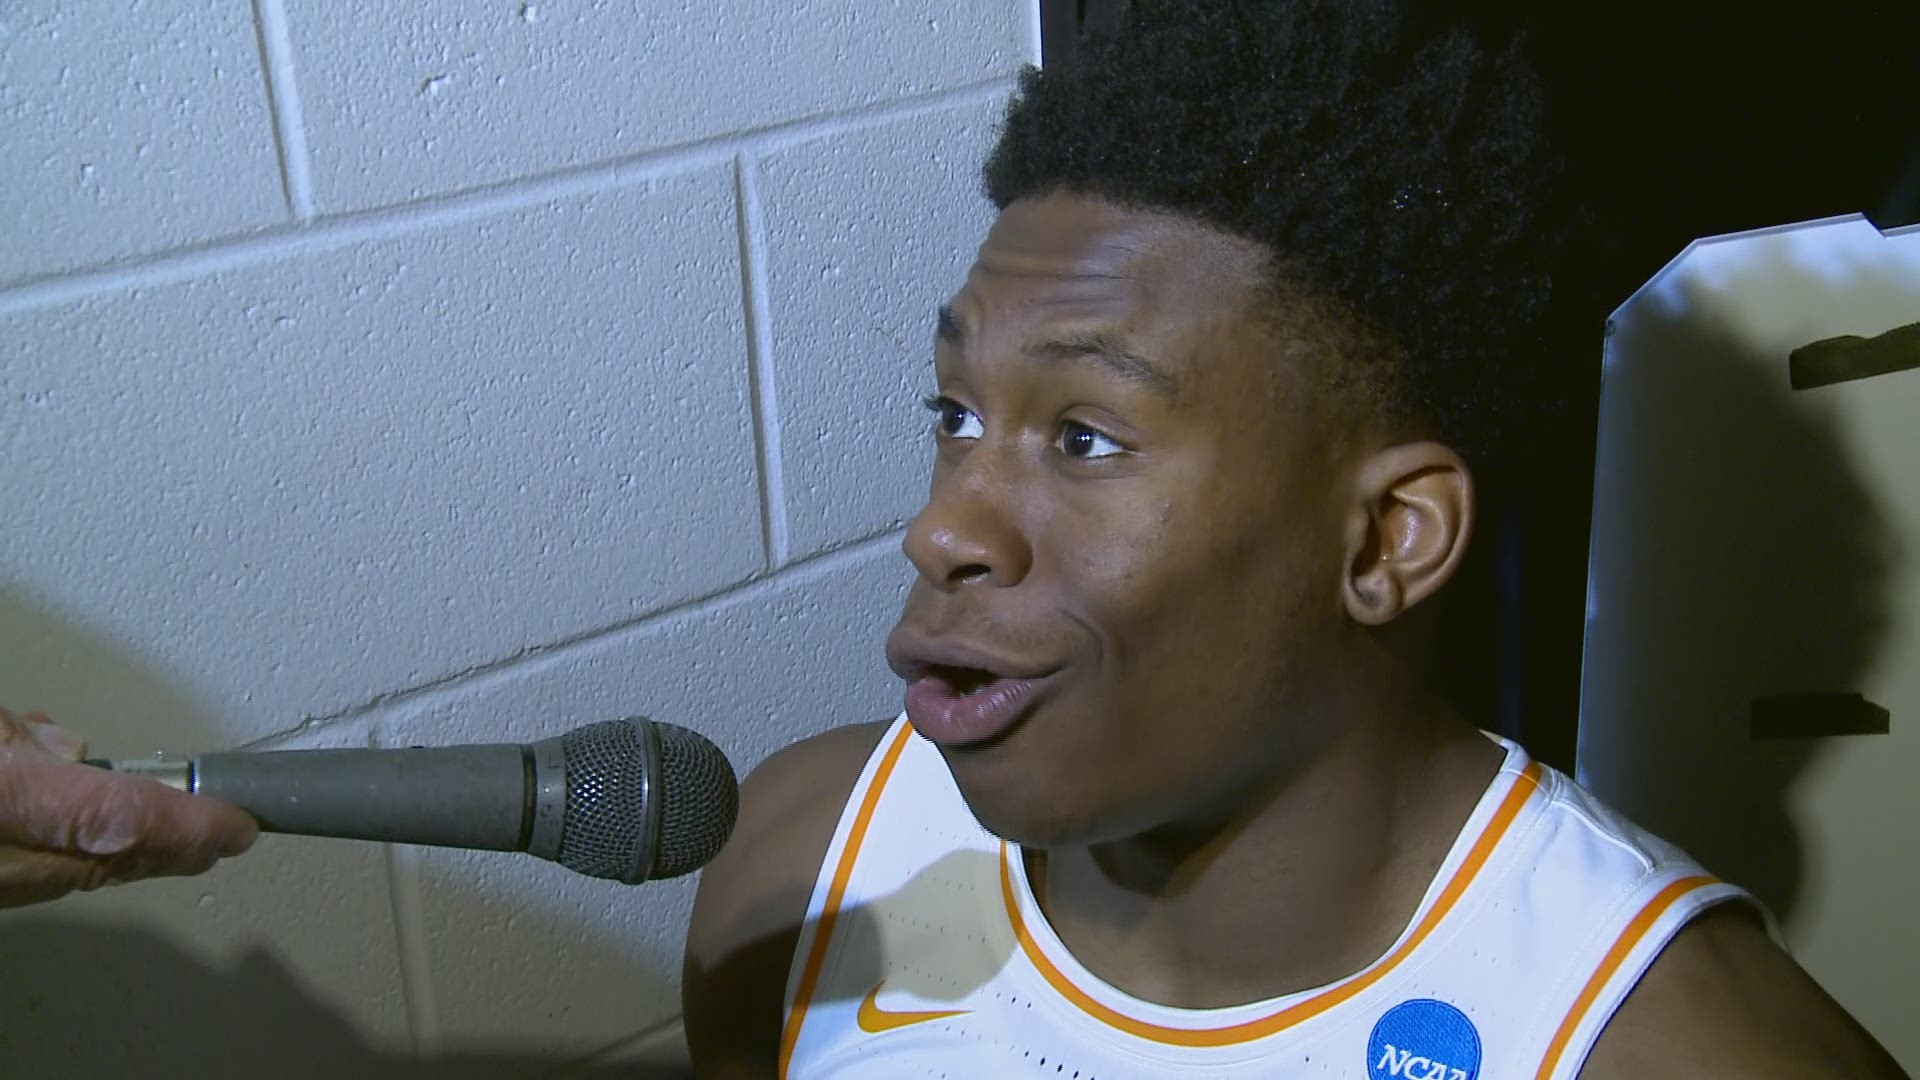 "Take me out, put Kyle in, it's going to change the game for us." Admiral Schofield says he asked to be sat late in the game because he knew Kyle Alexander would make a difference for the team.